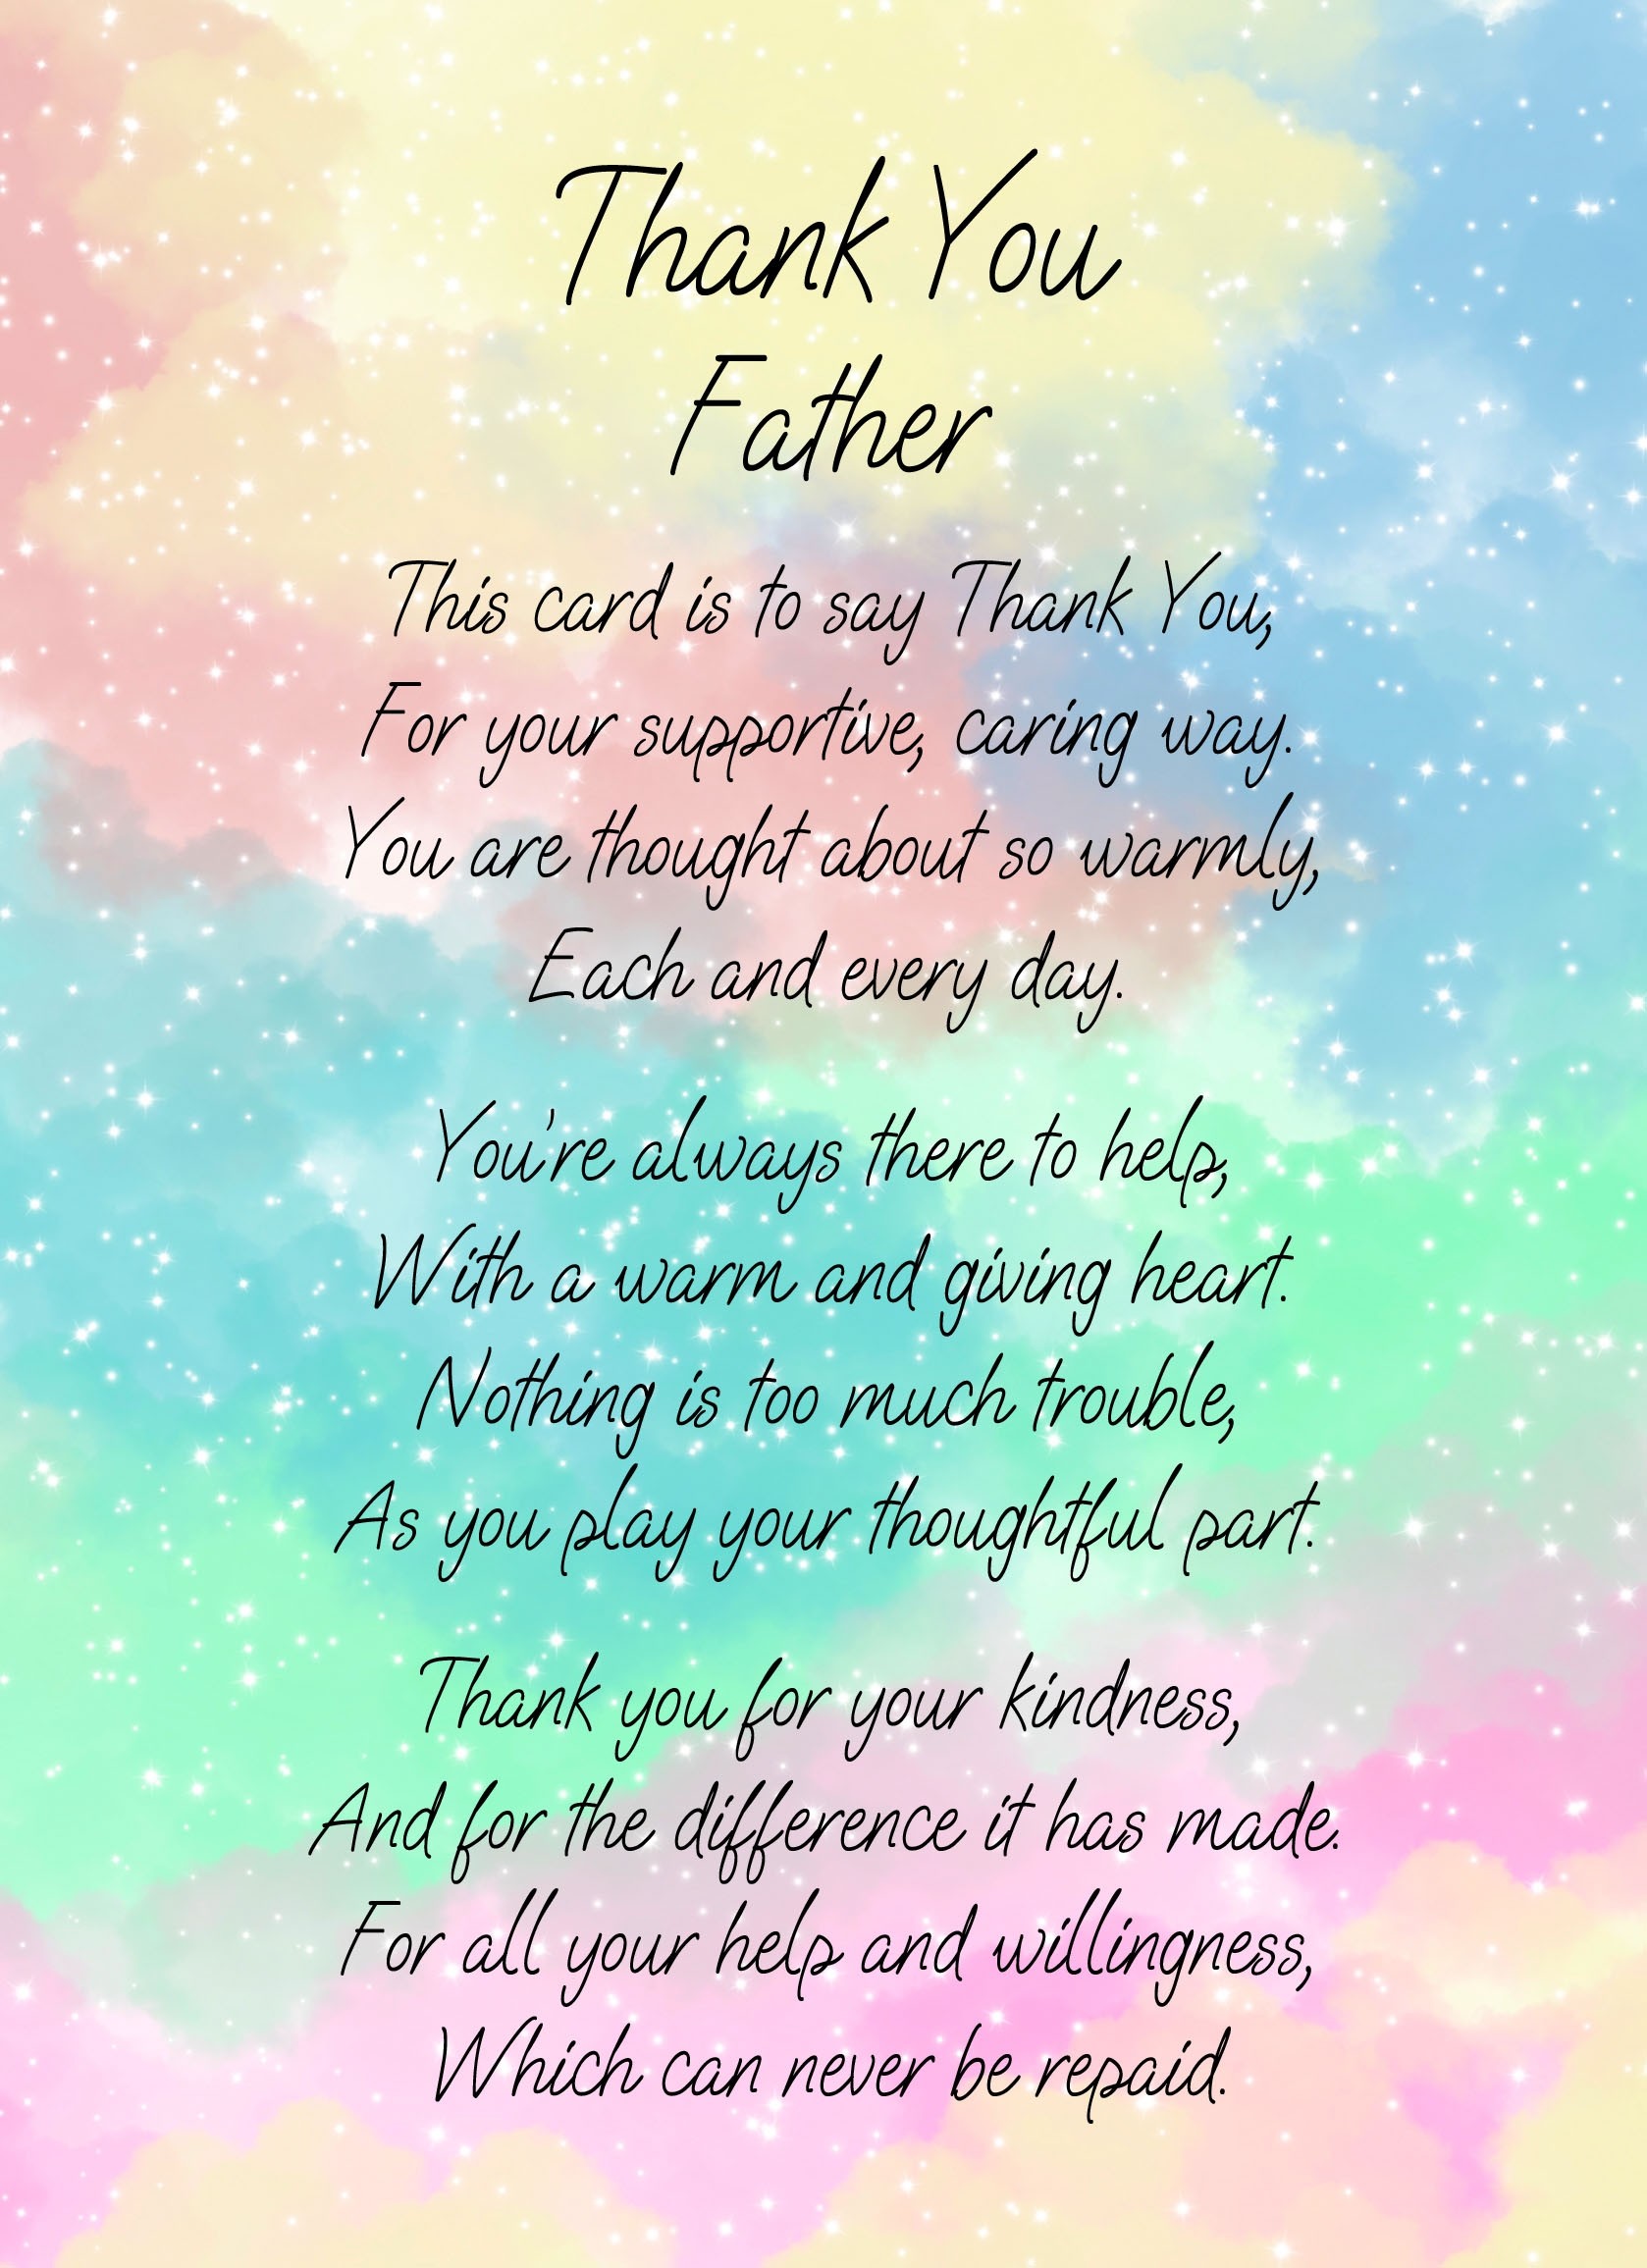 Thank You Poem Verse Card For Father